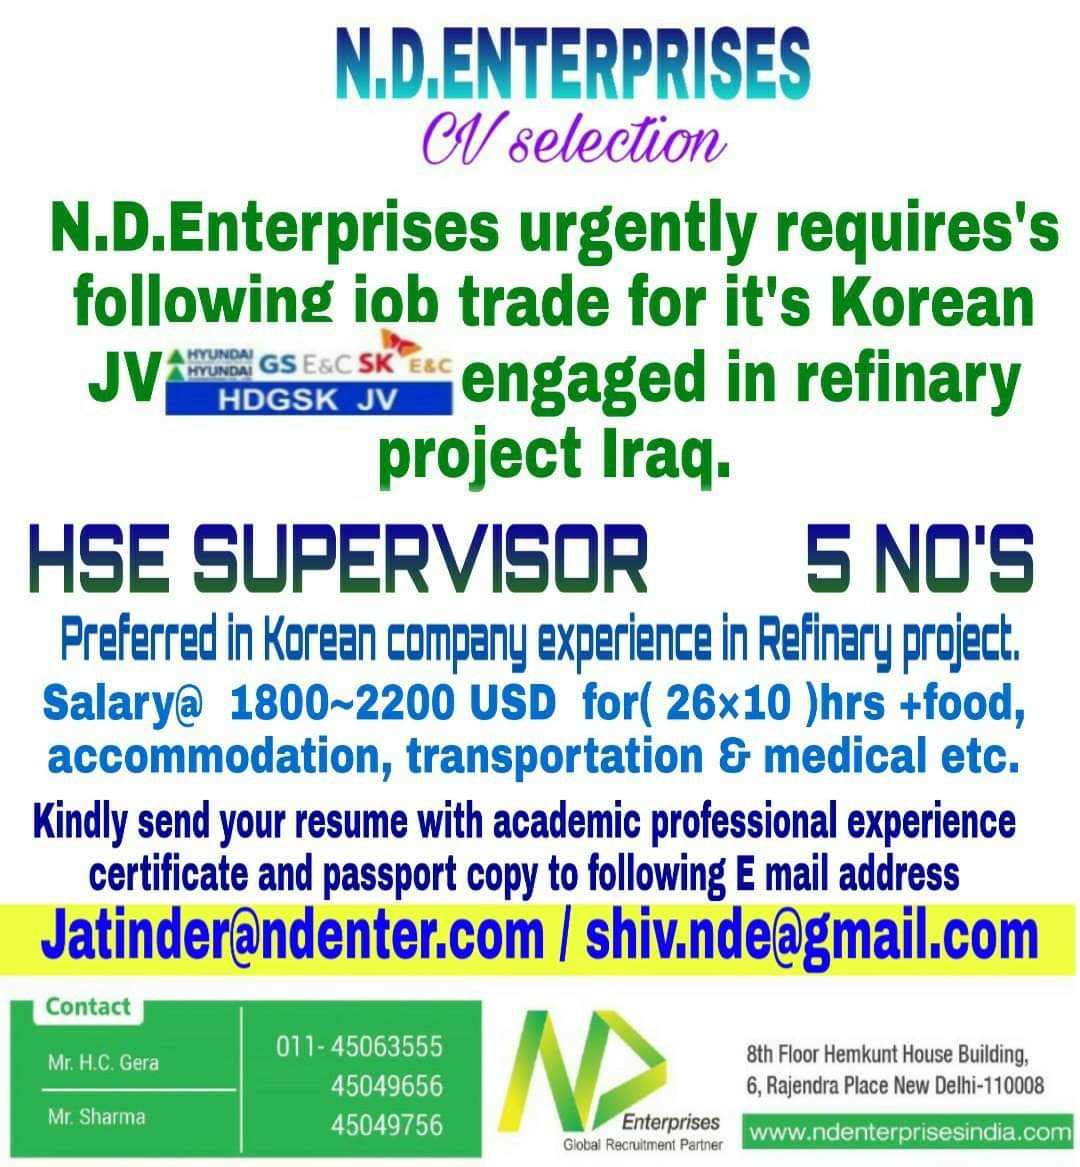 URGENTLY REQUIRES FOR JOB TRADE FOR REFINARY PROJECT